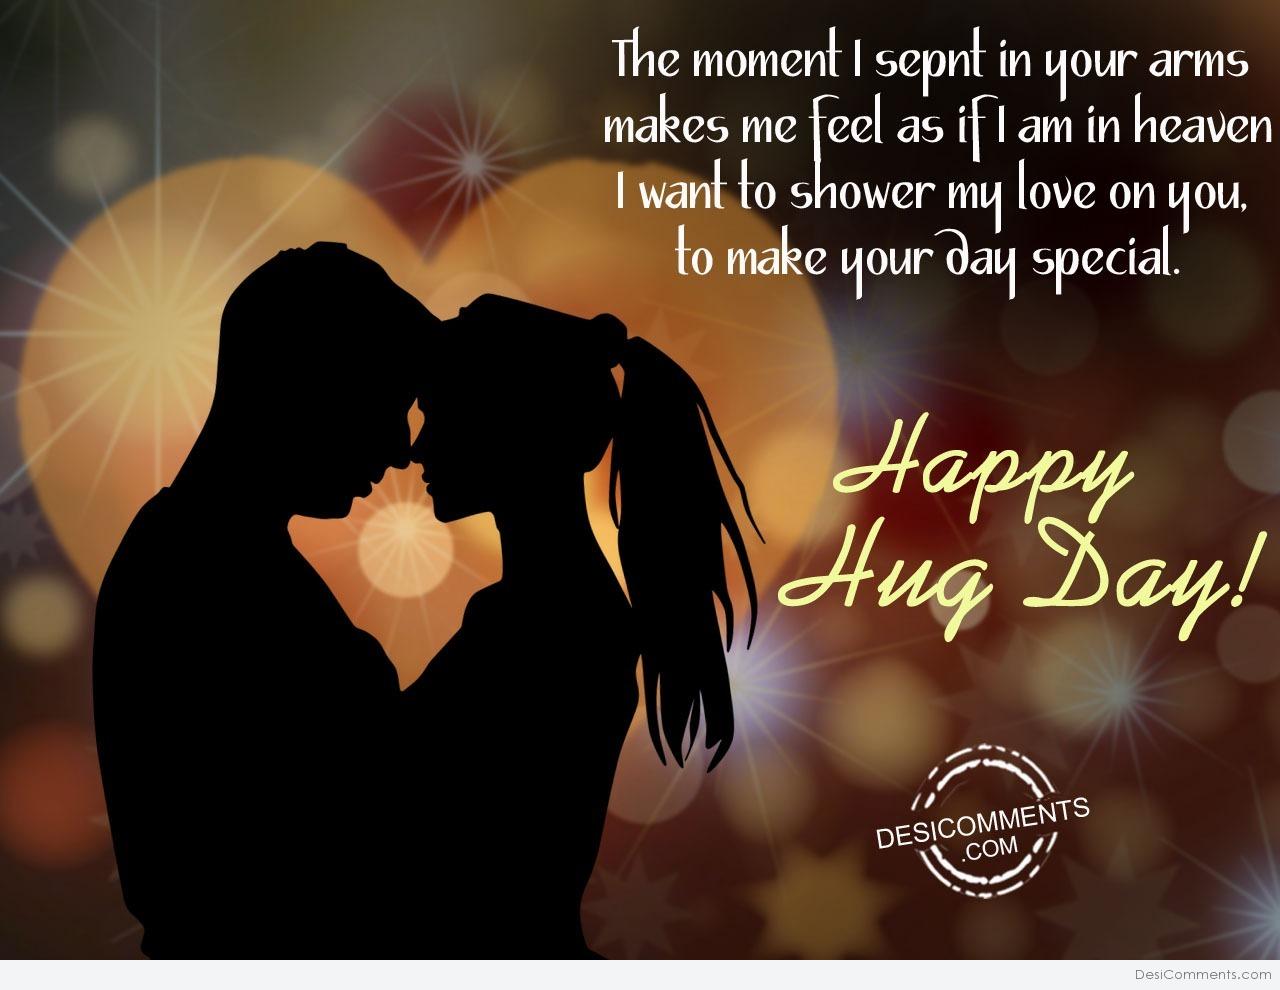 The moment i spent in your arms,Happy hug day - DesiComments.com